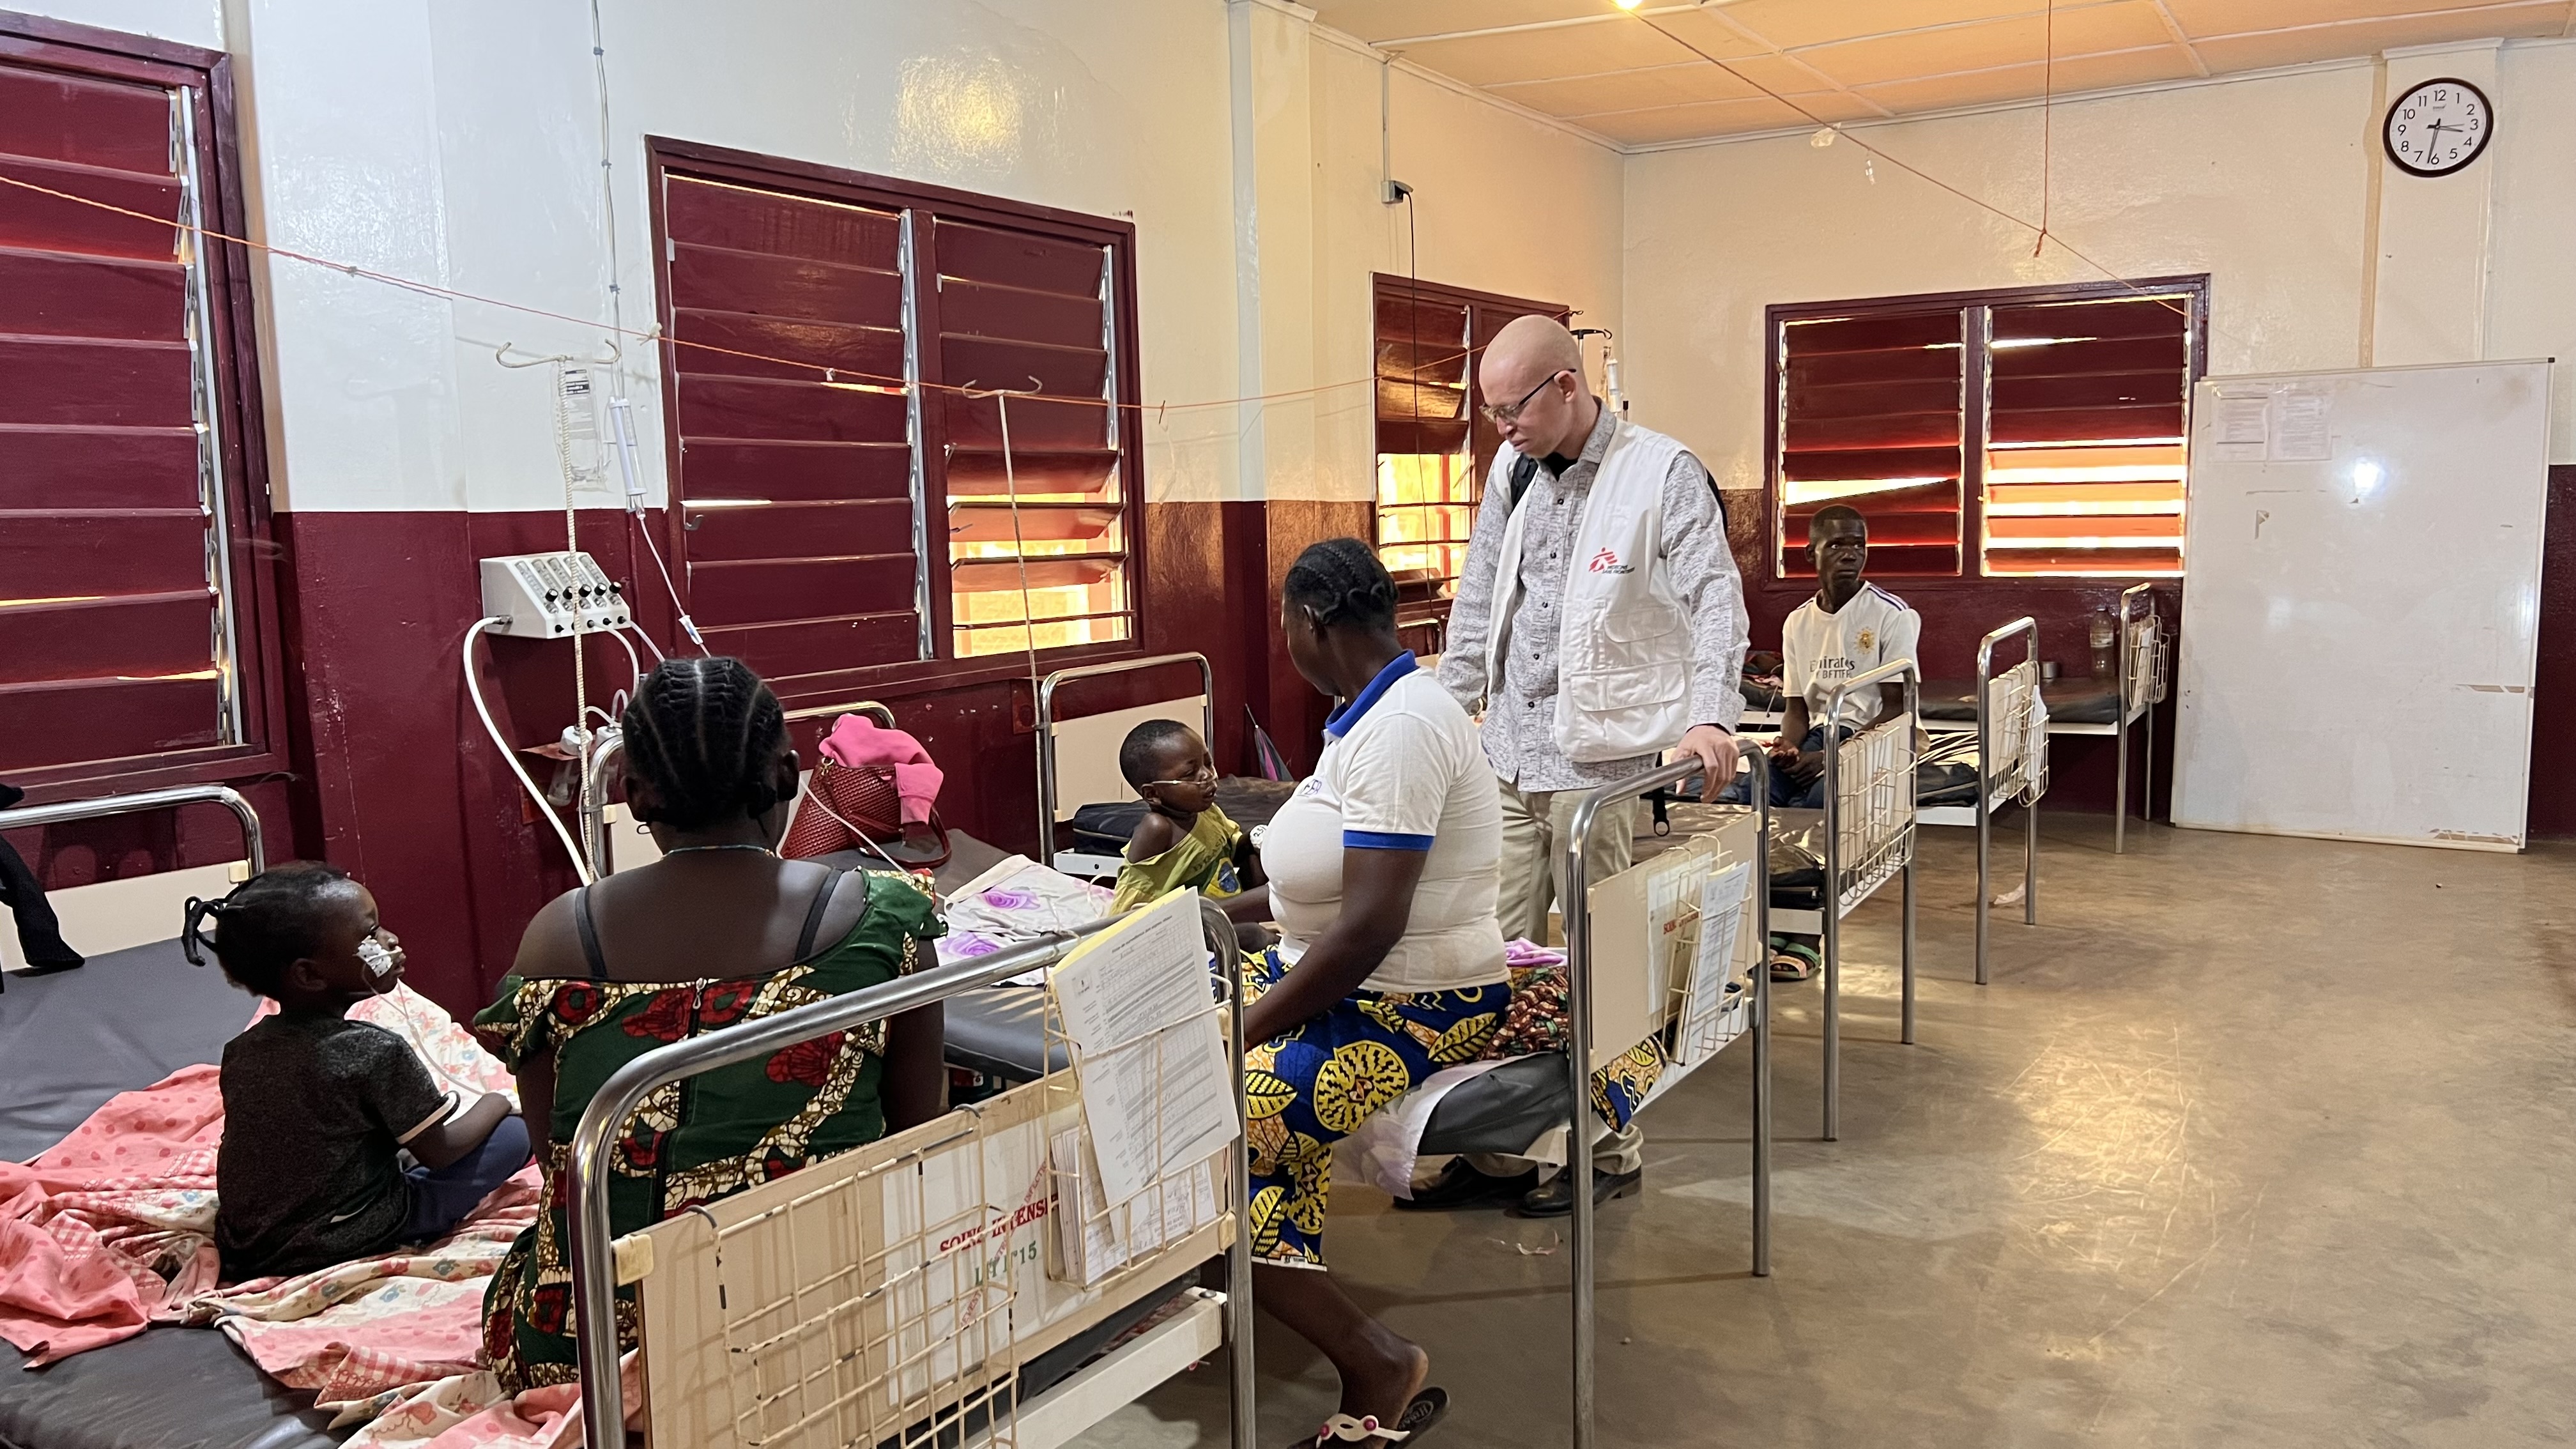 Dr Coulibaly conducts medical examinations for patients in the pediatrics of Bossangoa hospital. © Charlotte Sujobert/MSF